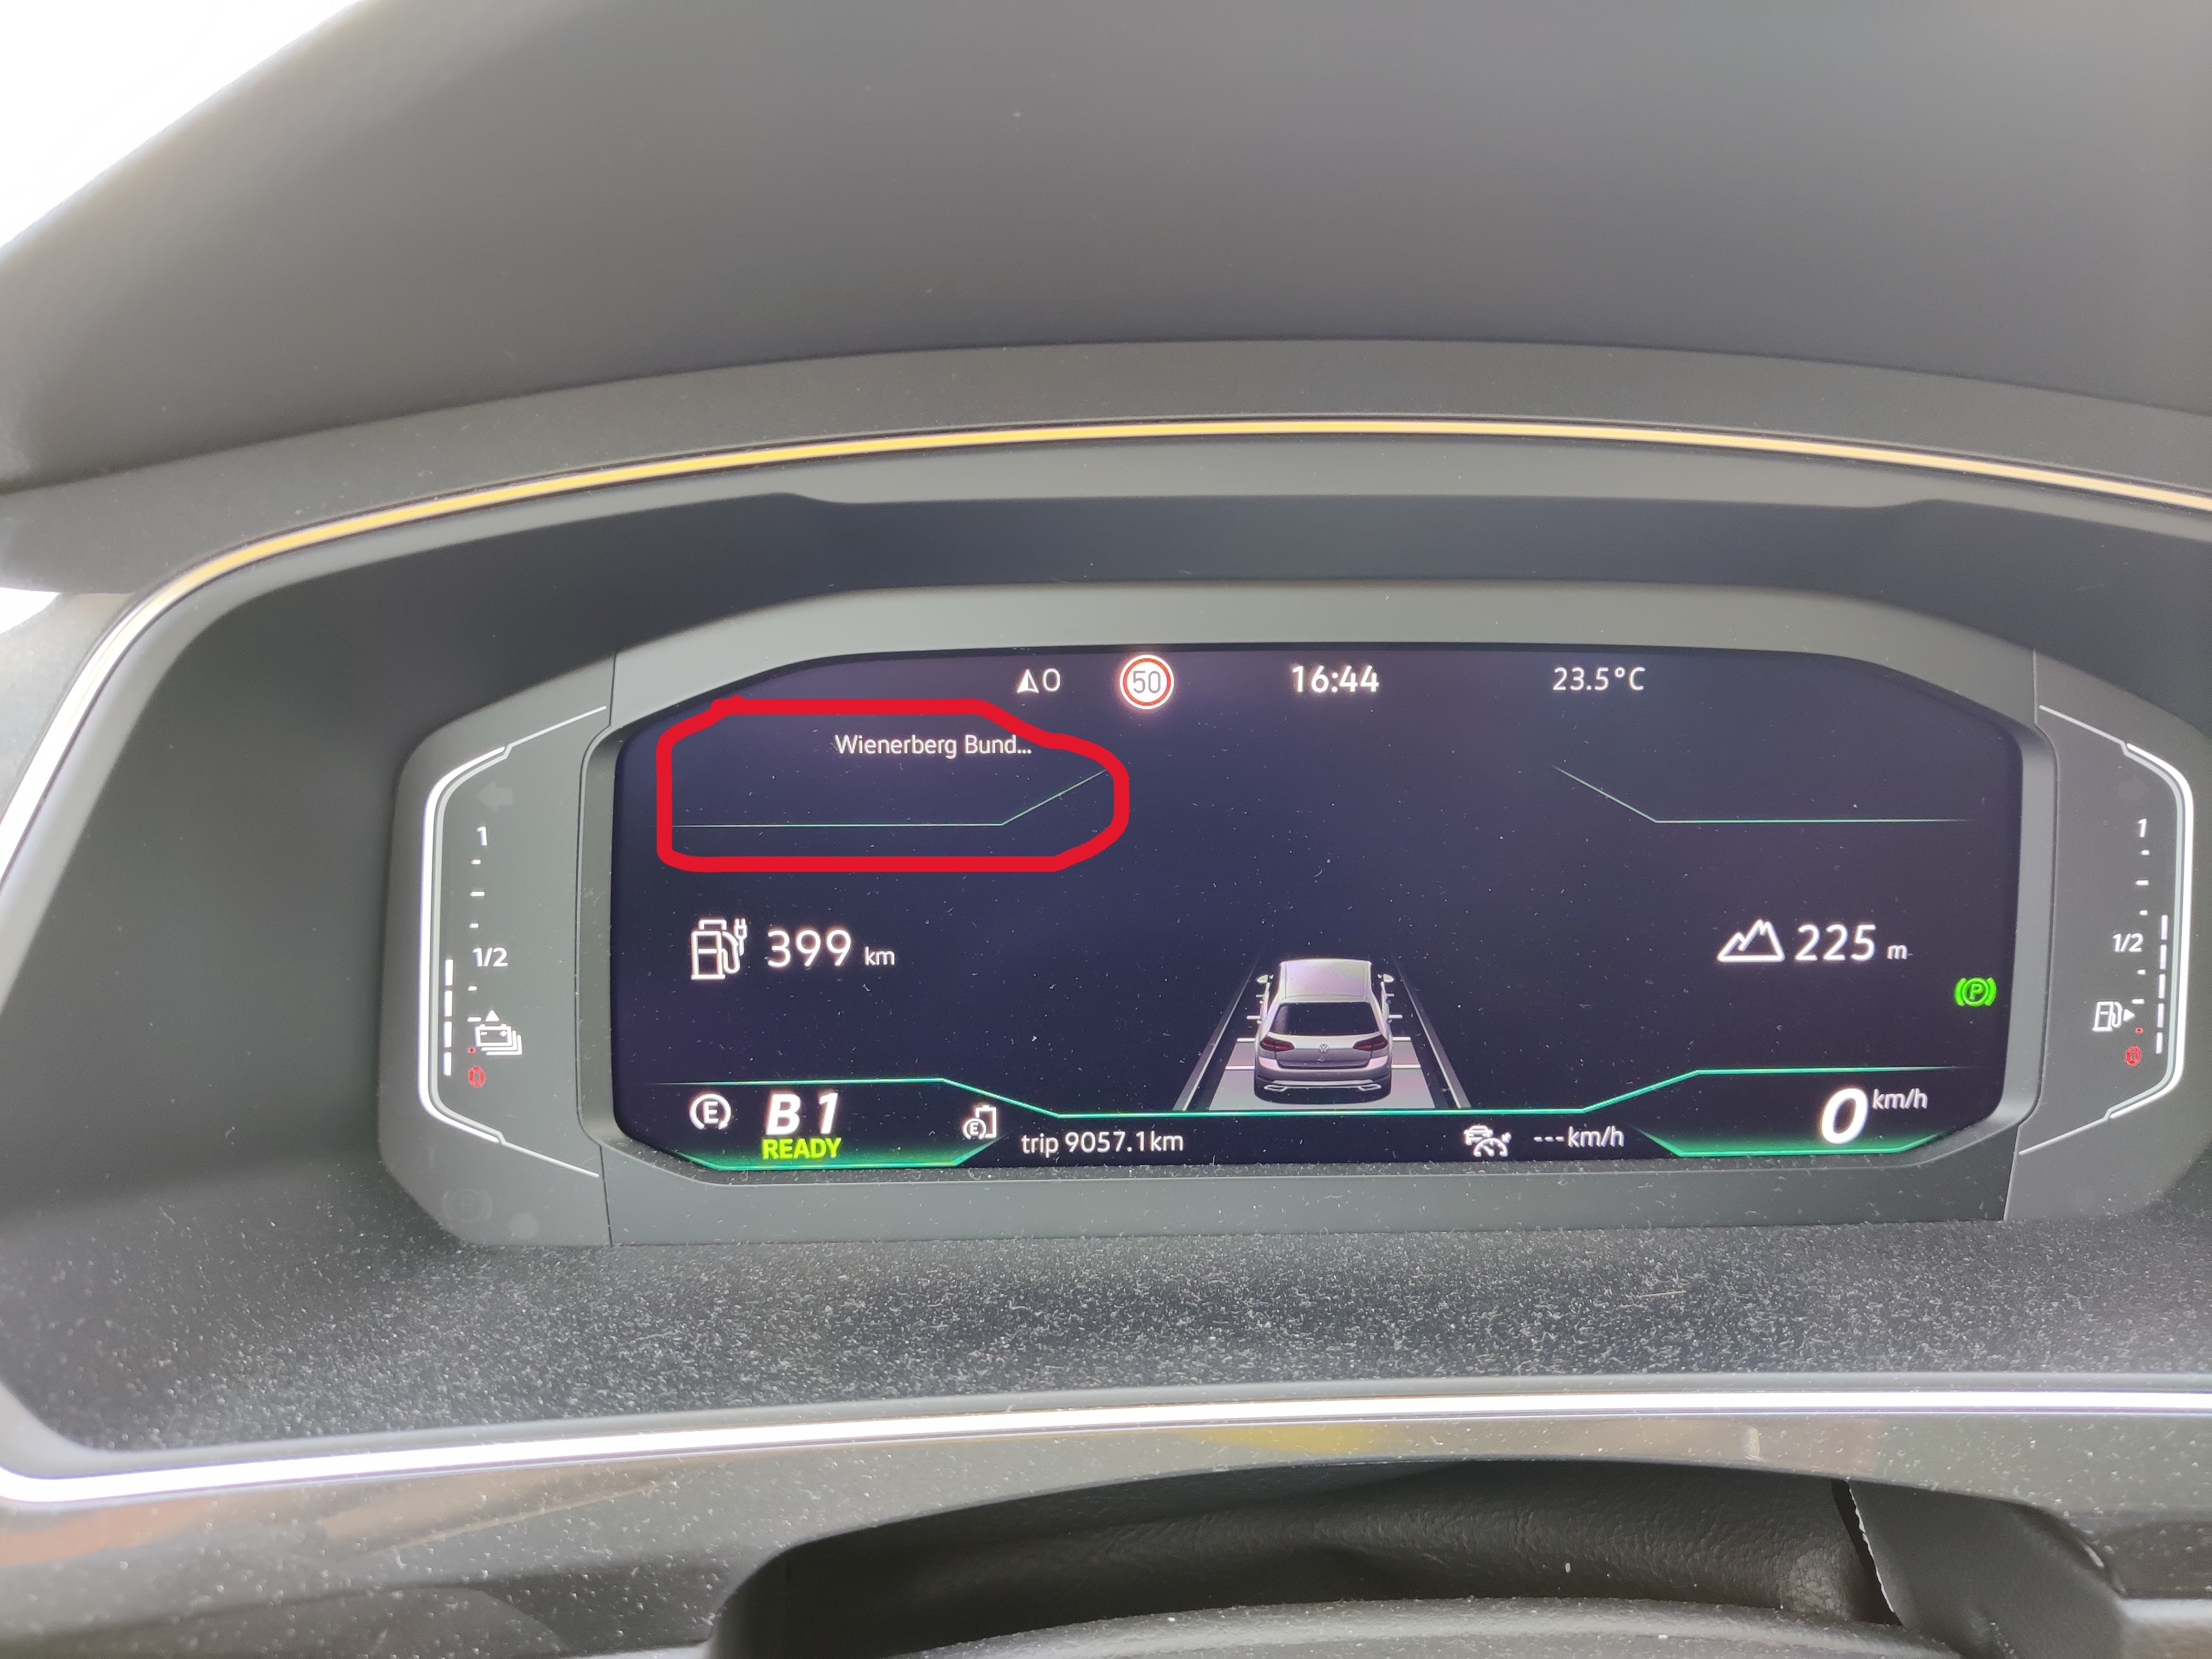 Waze not showing next route direction on in-car display anymore